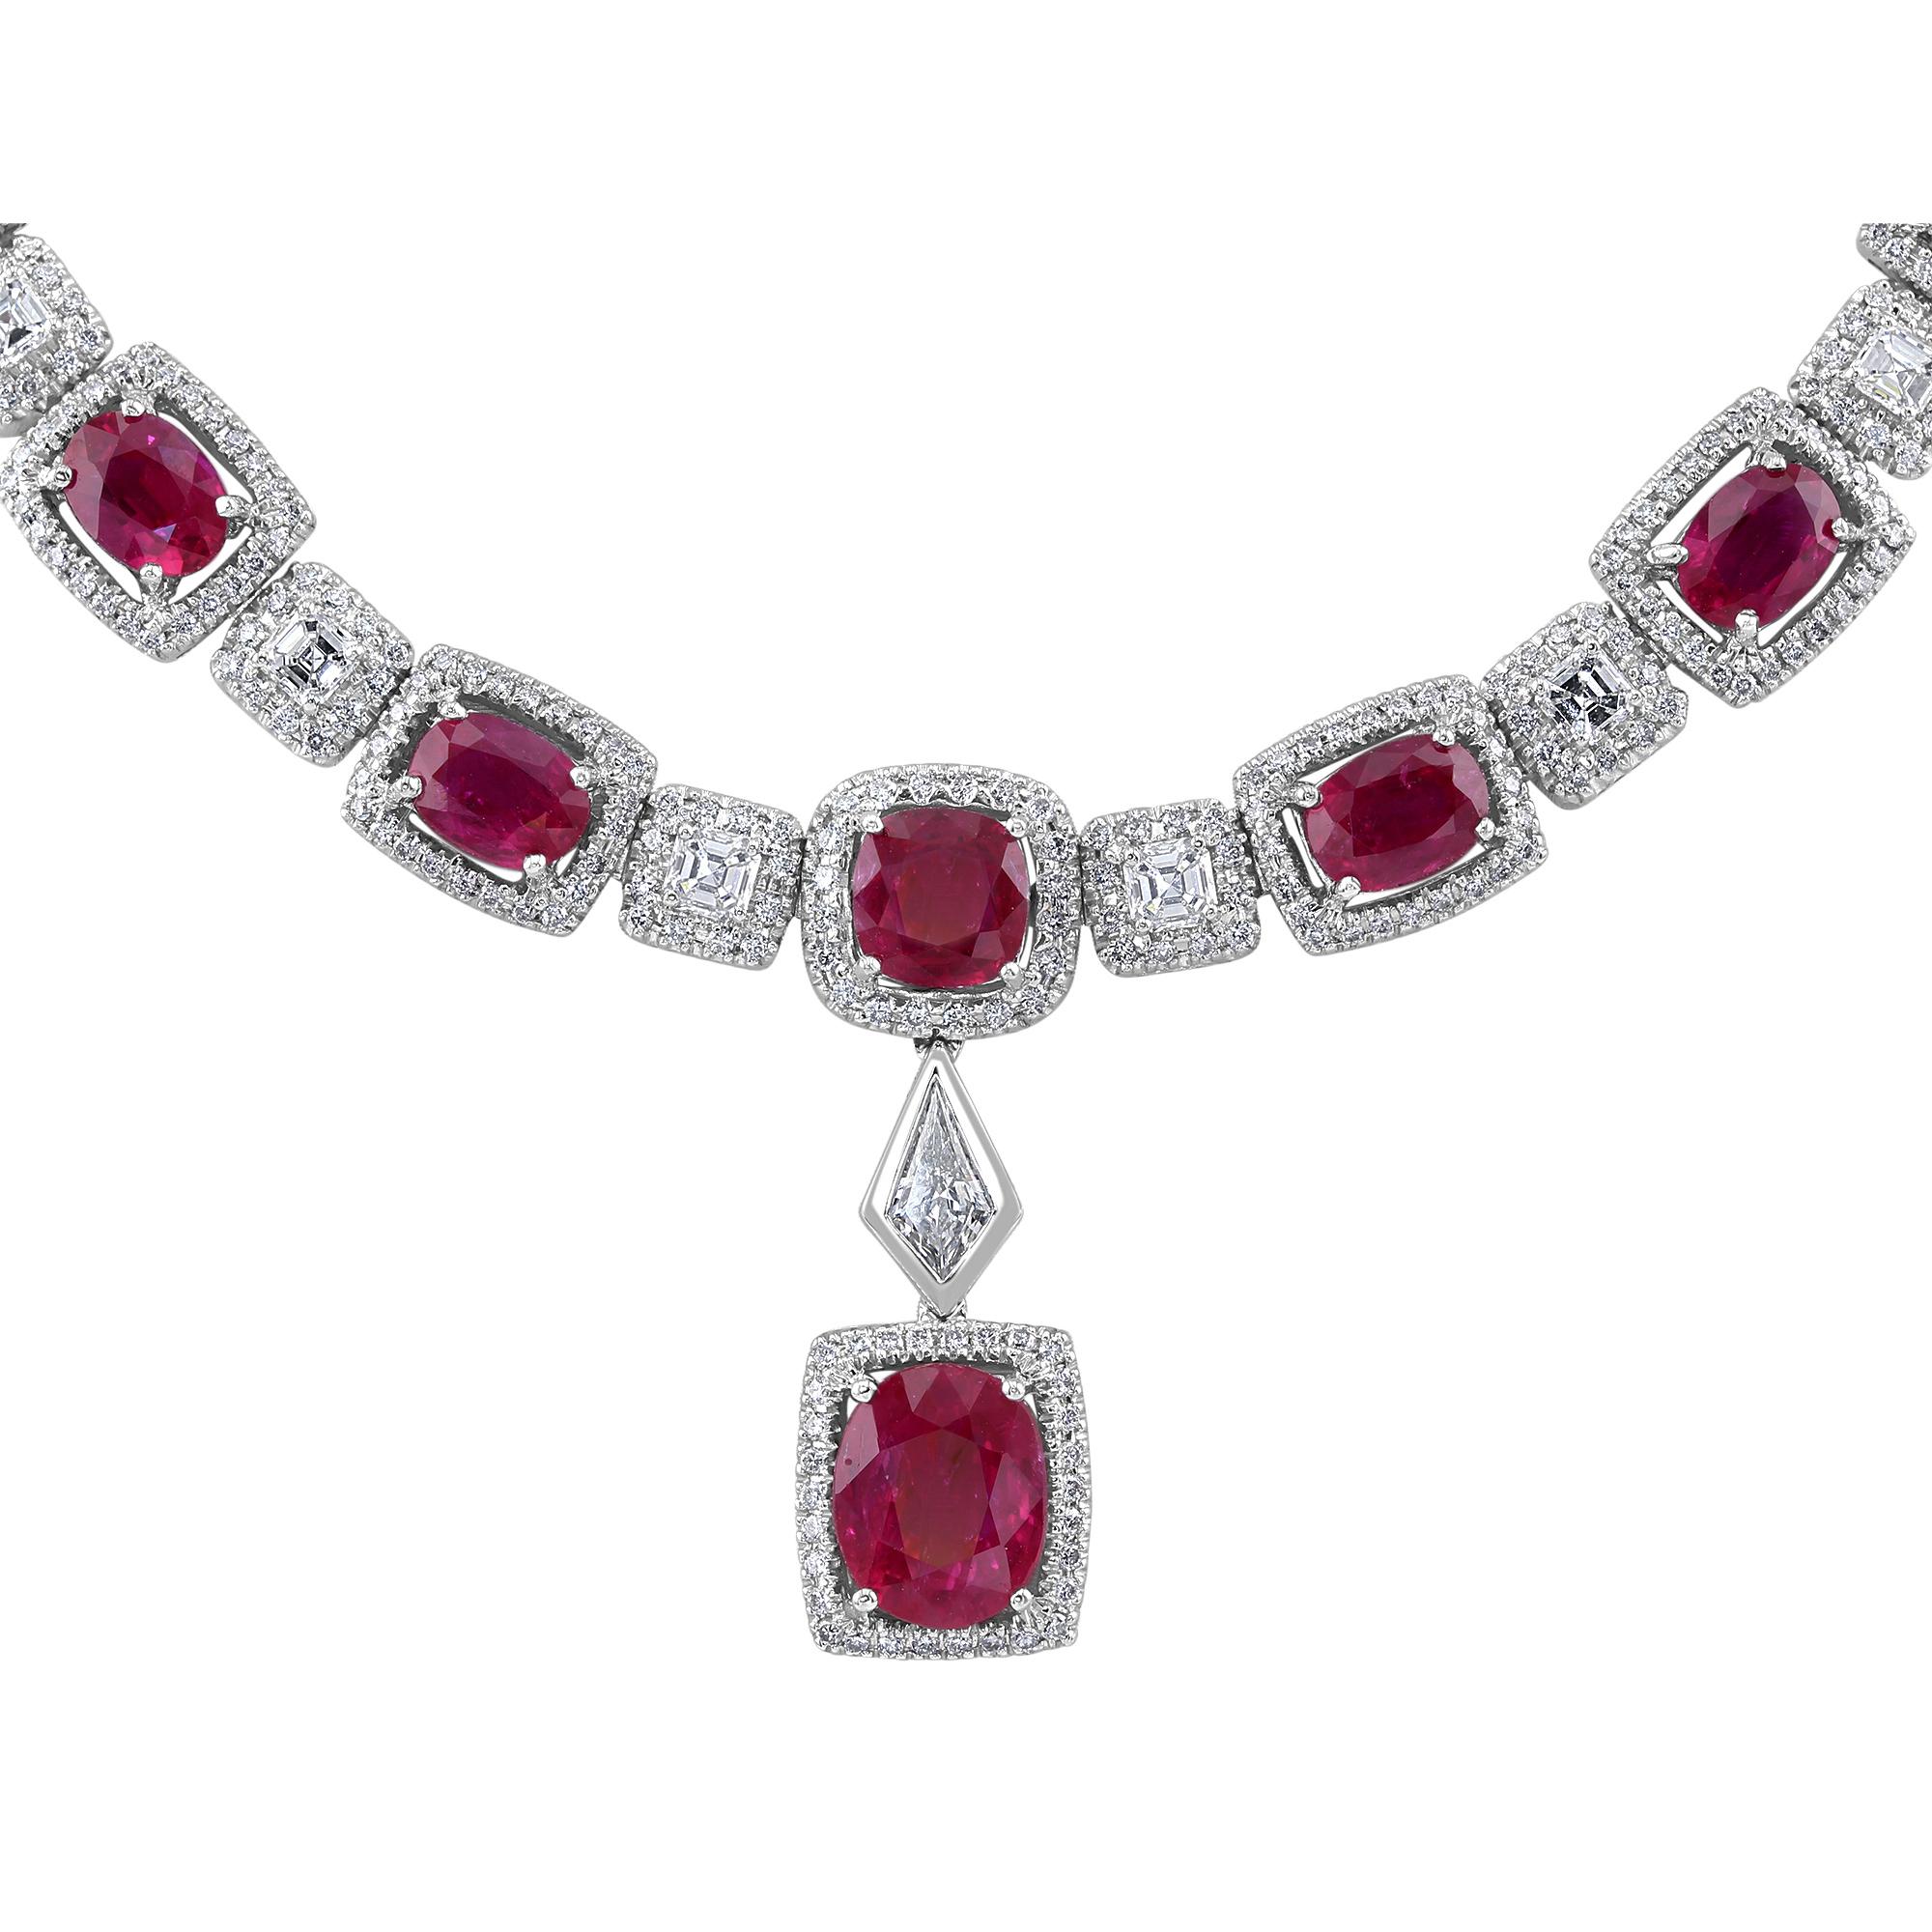 Ruby: 29.36 carat

Diamond weight: 9.50 carat 

Clasp: Tongue in box clasp with safety latch. 

Length: 17 Inch

This stunning and vibrant necklace features 29.36 carat Rubies, alternating with asscher cut diamonds, surrounded by diamond halo. The